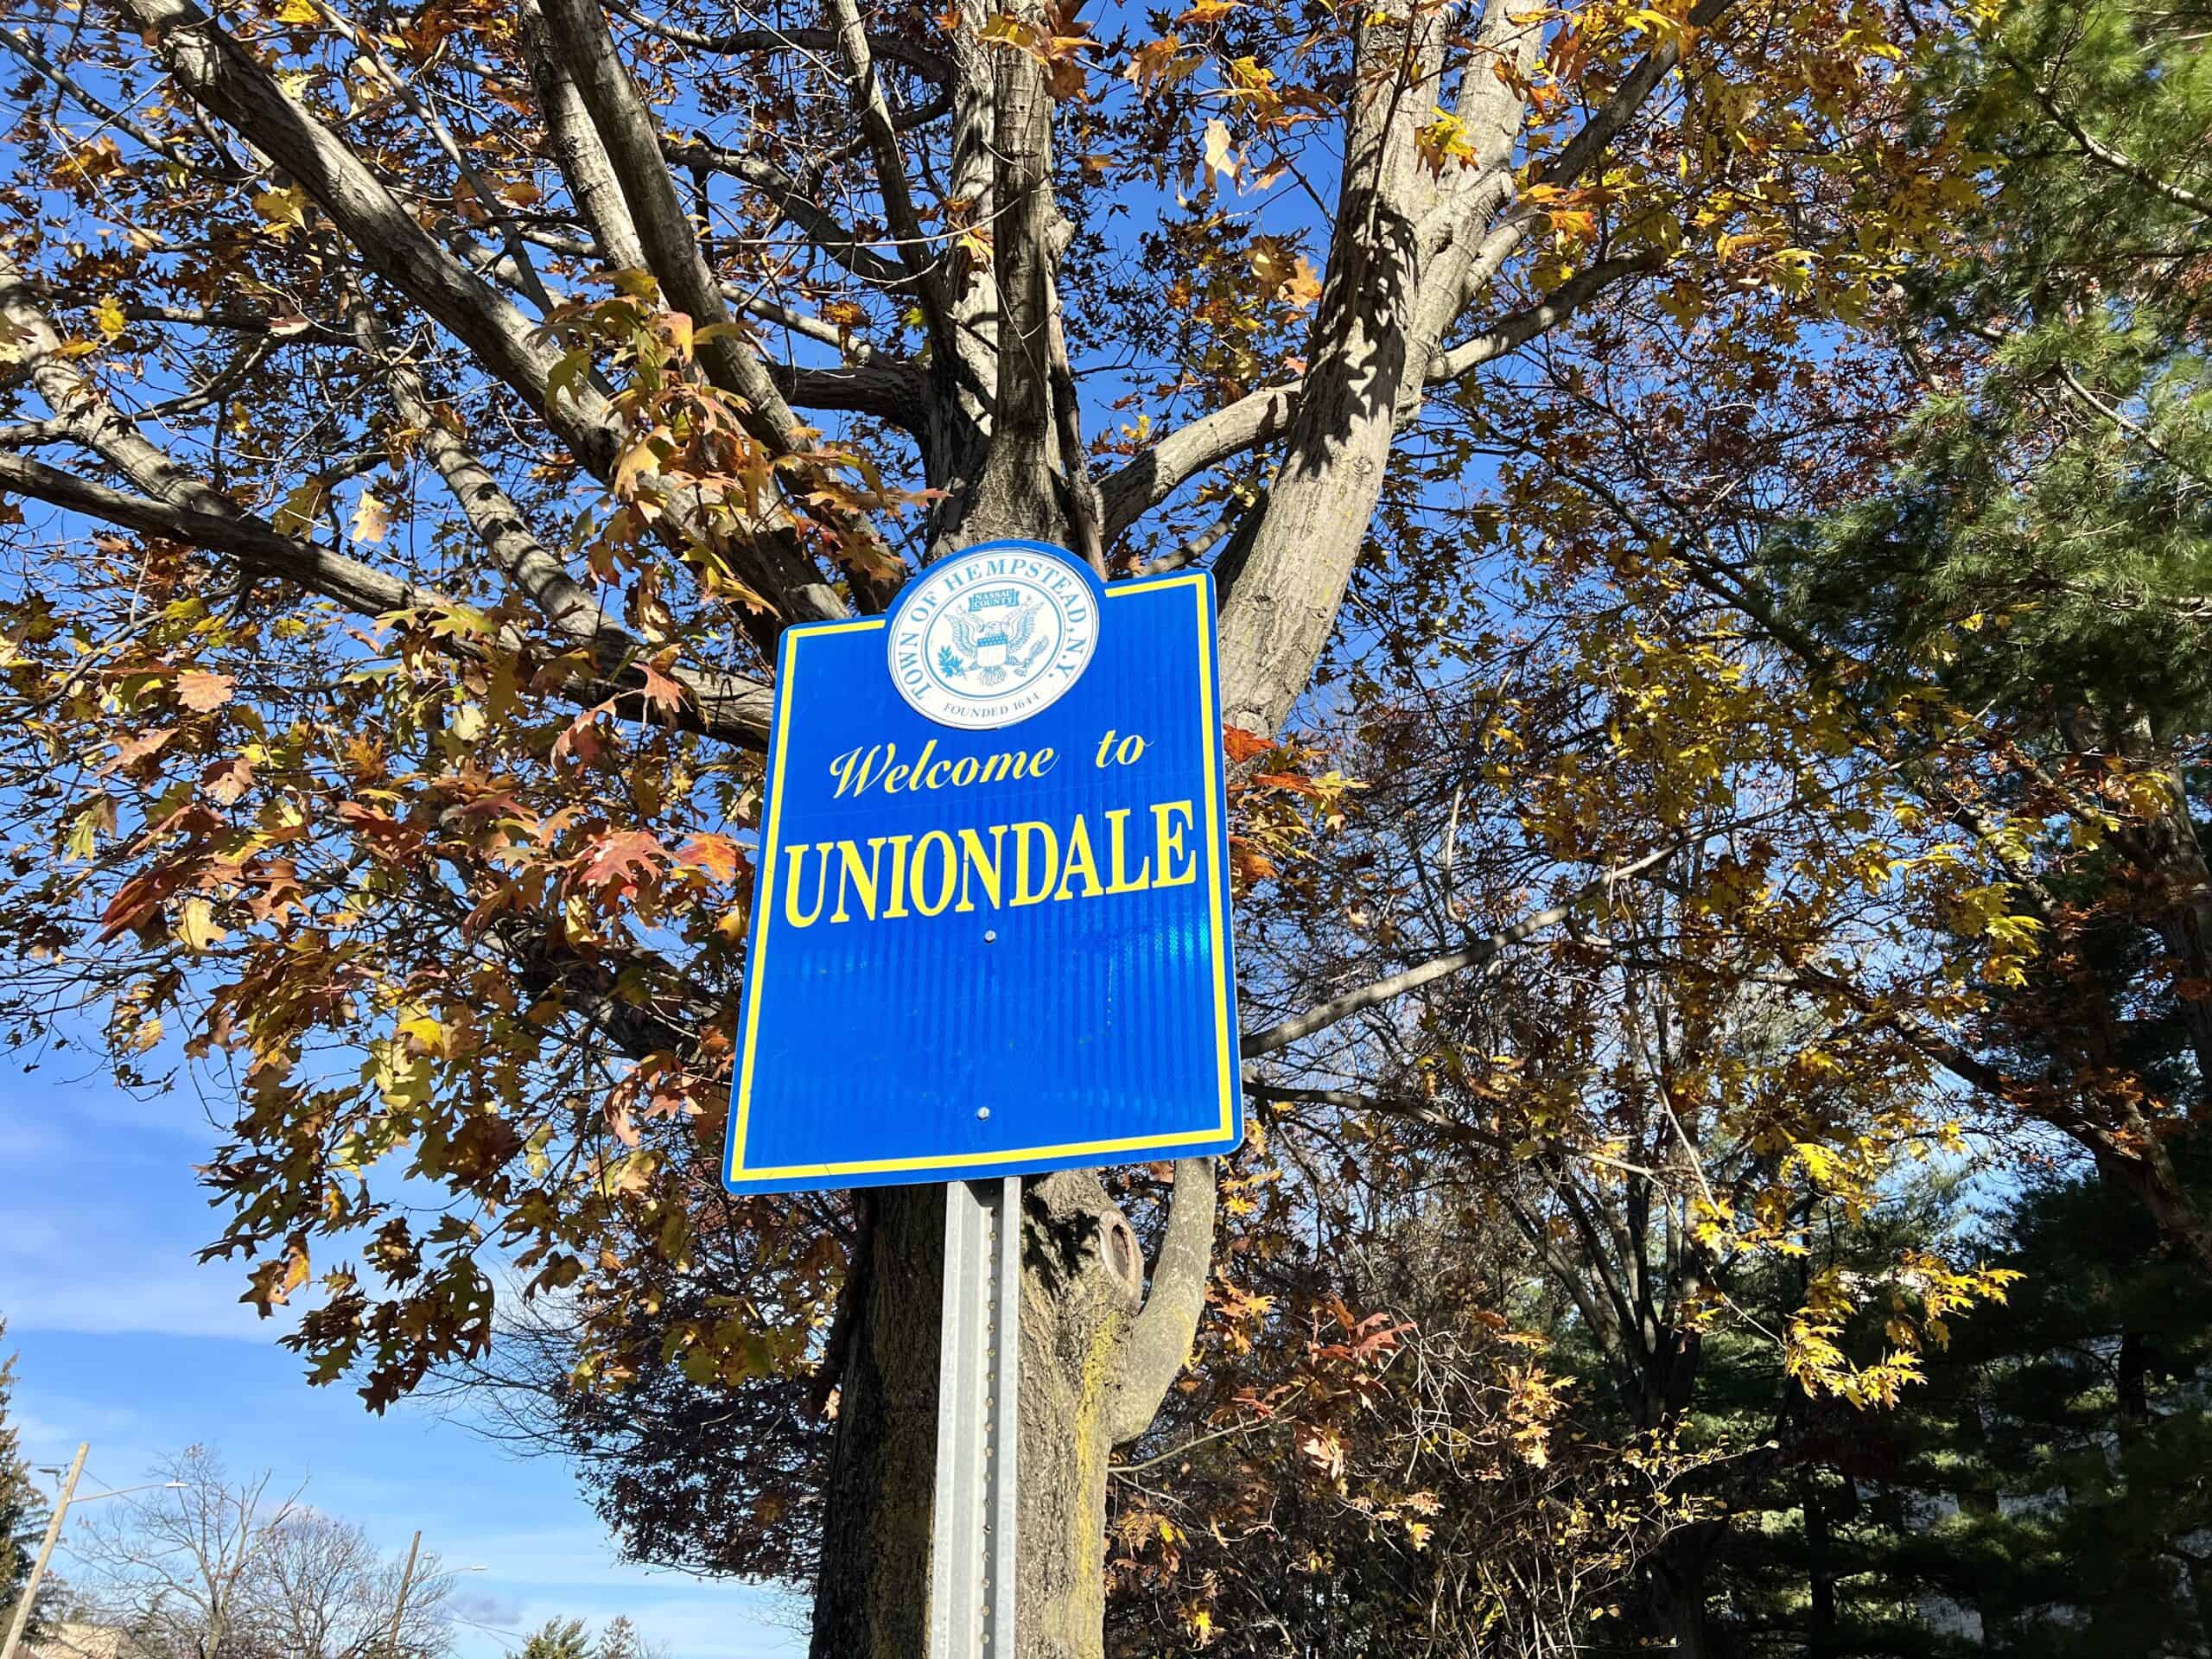 Uniondale Welcome Sign, Uniondale, Long Island, New York December 3, 2021 by AITFFan1